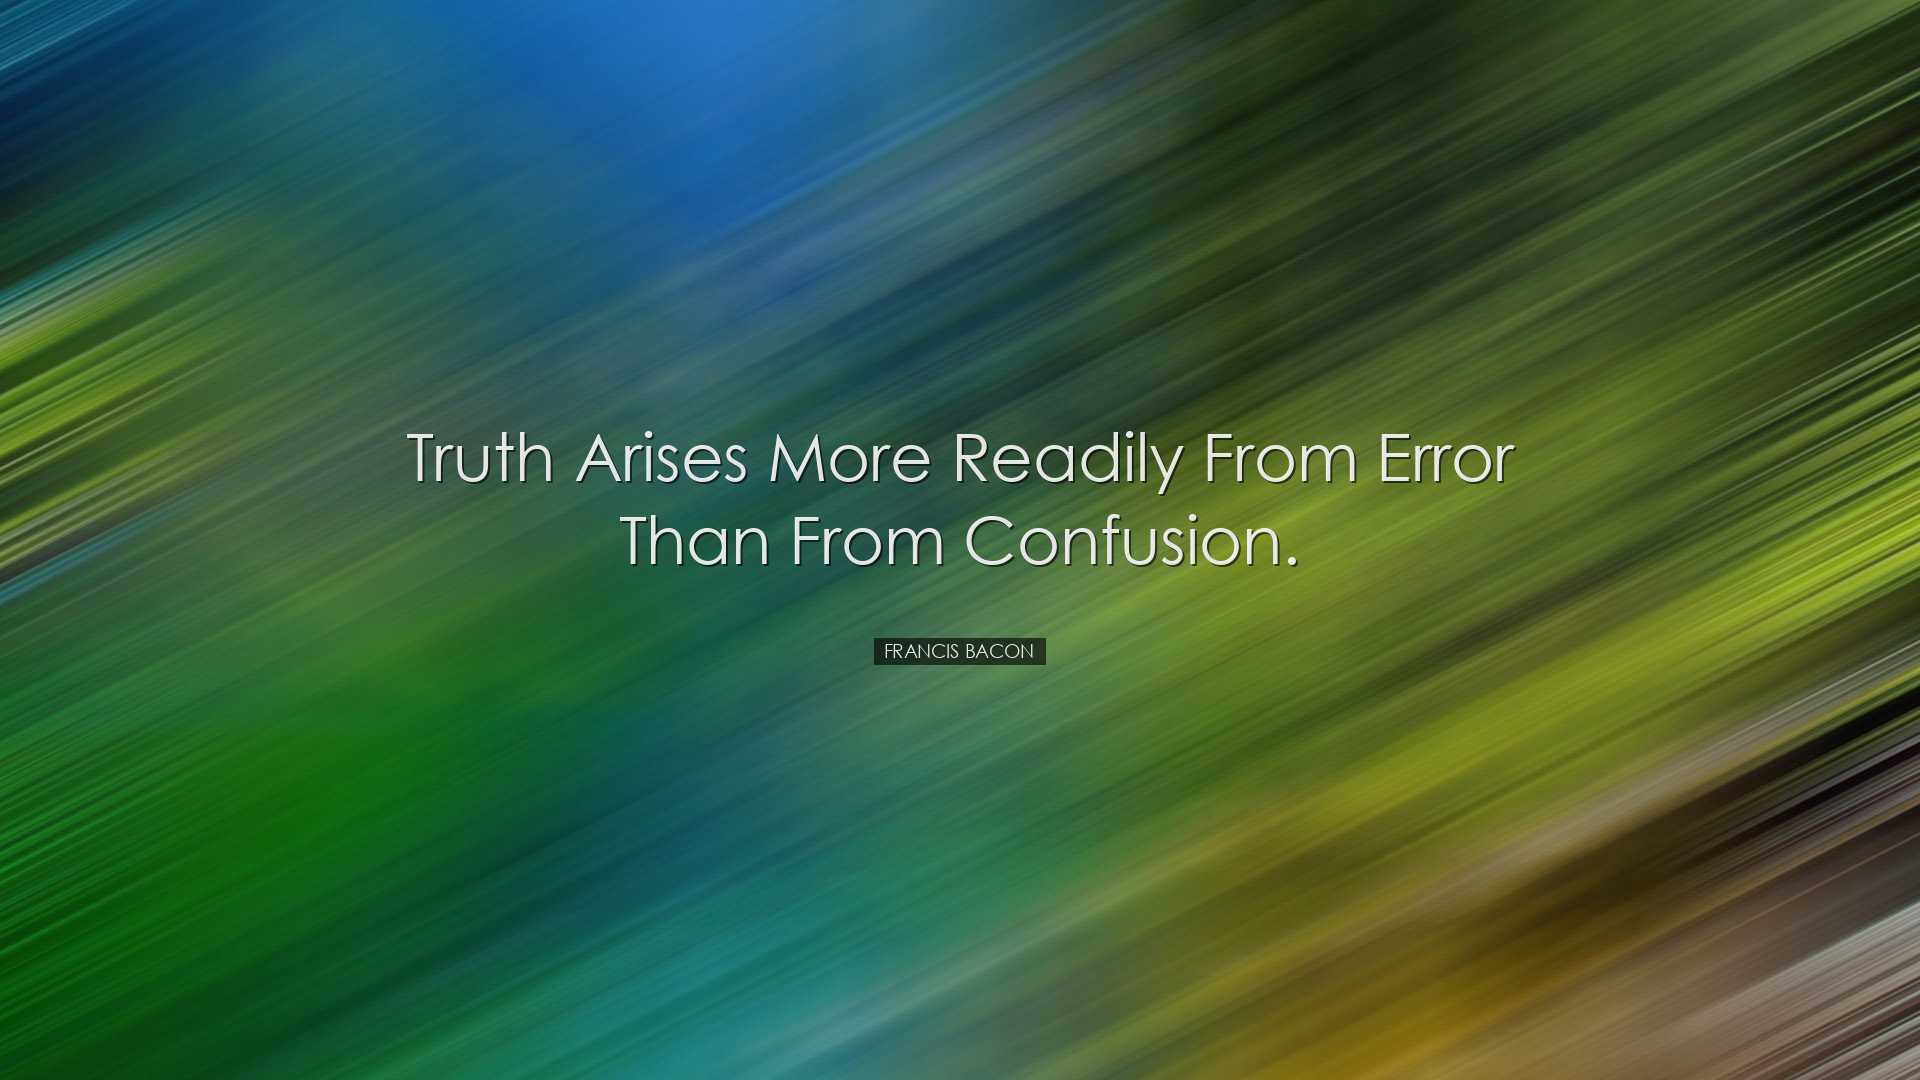 Truth arises more readily from error than from confusion. - Franci